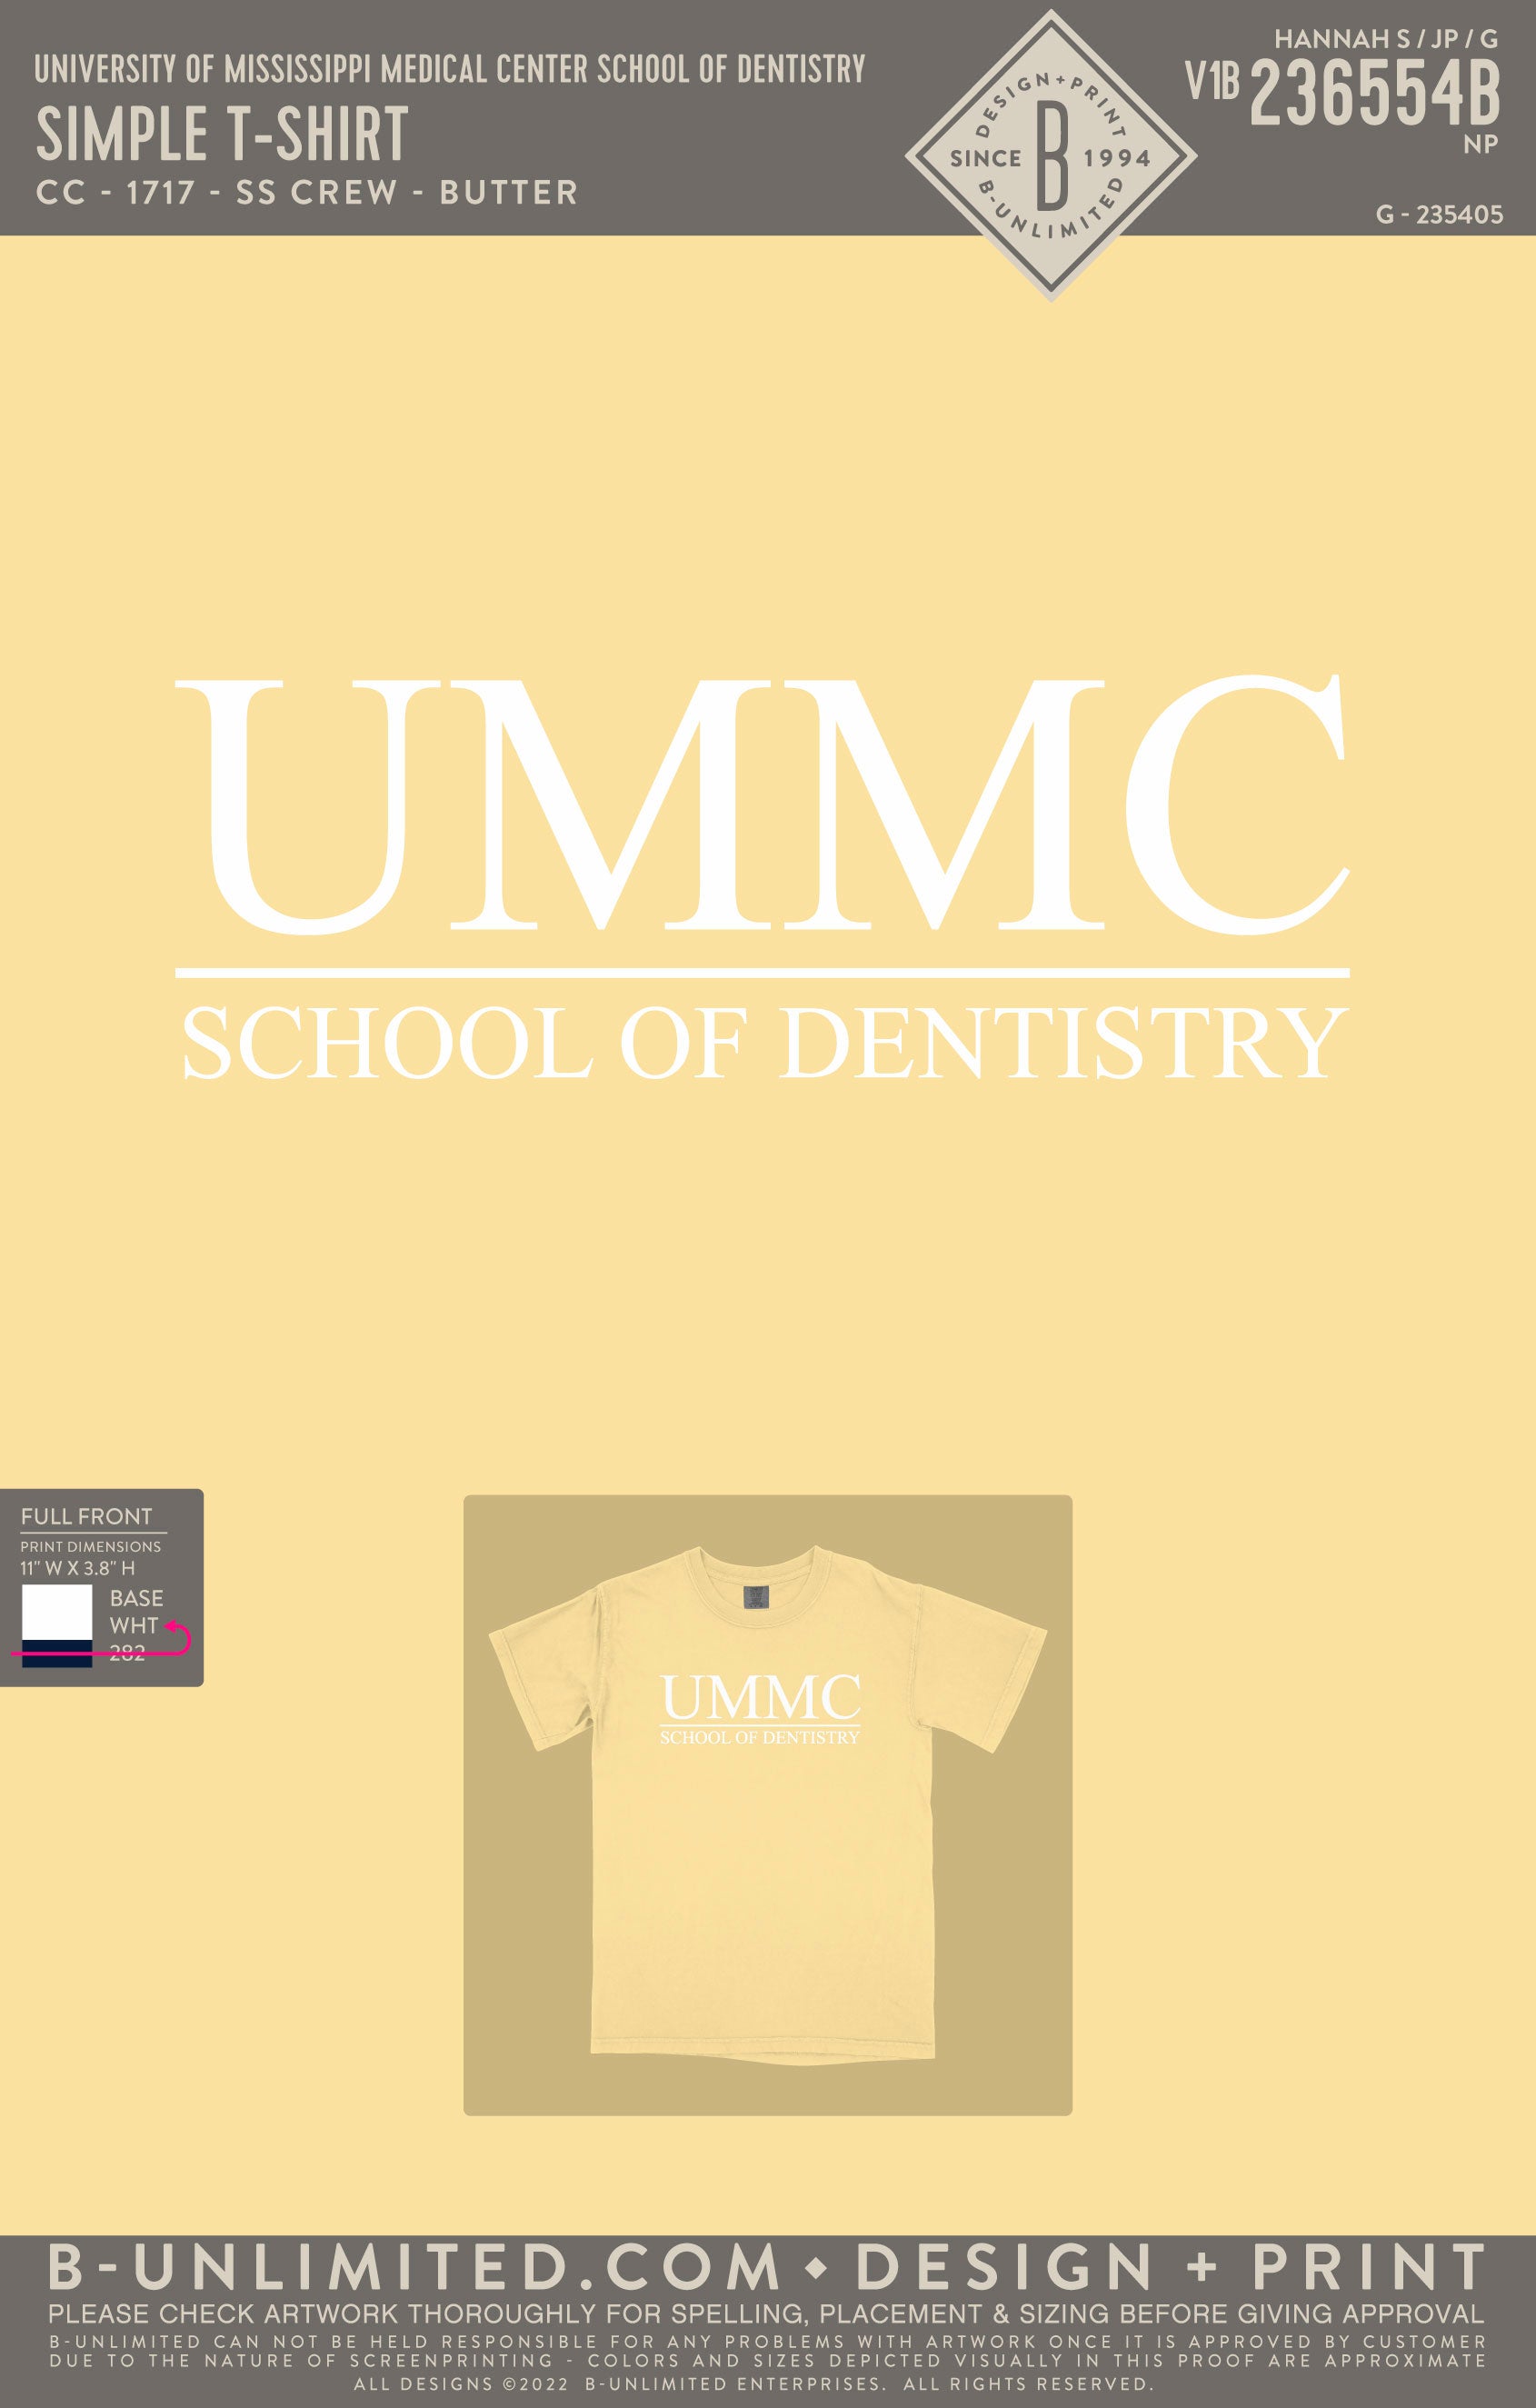 University of Mississippi Medical Center School of Dentistry - Simple T-Shirt - CC - 1717 - SS Crew - Butter